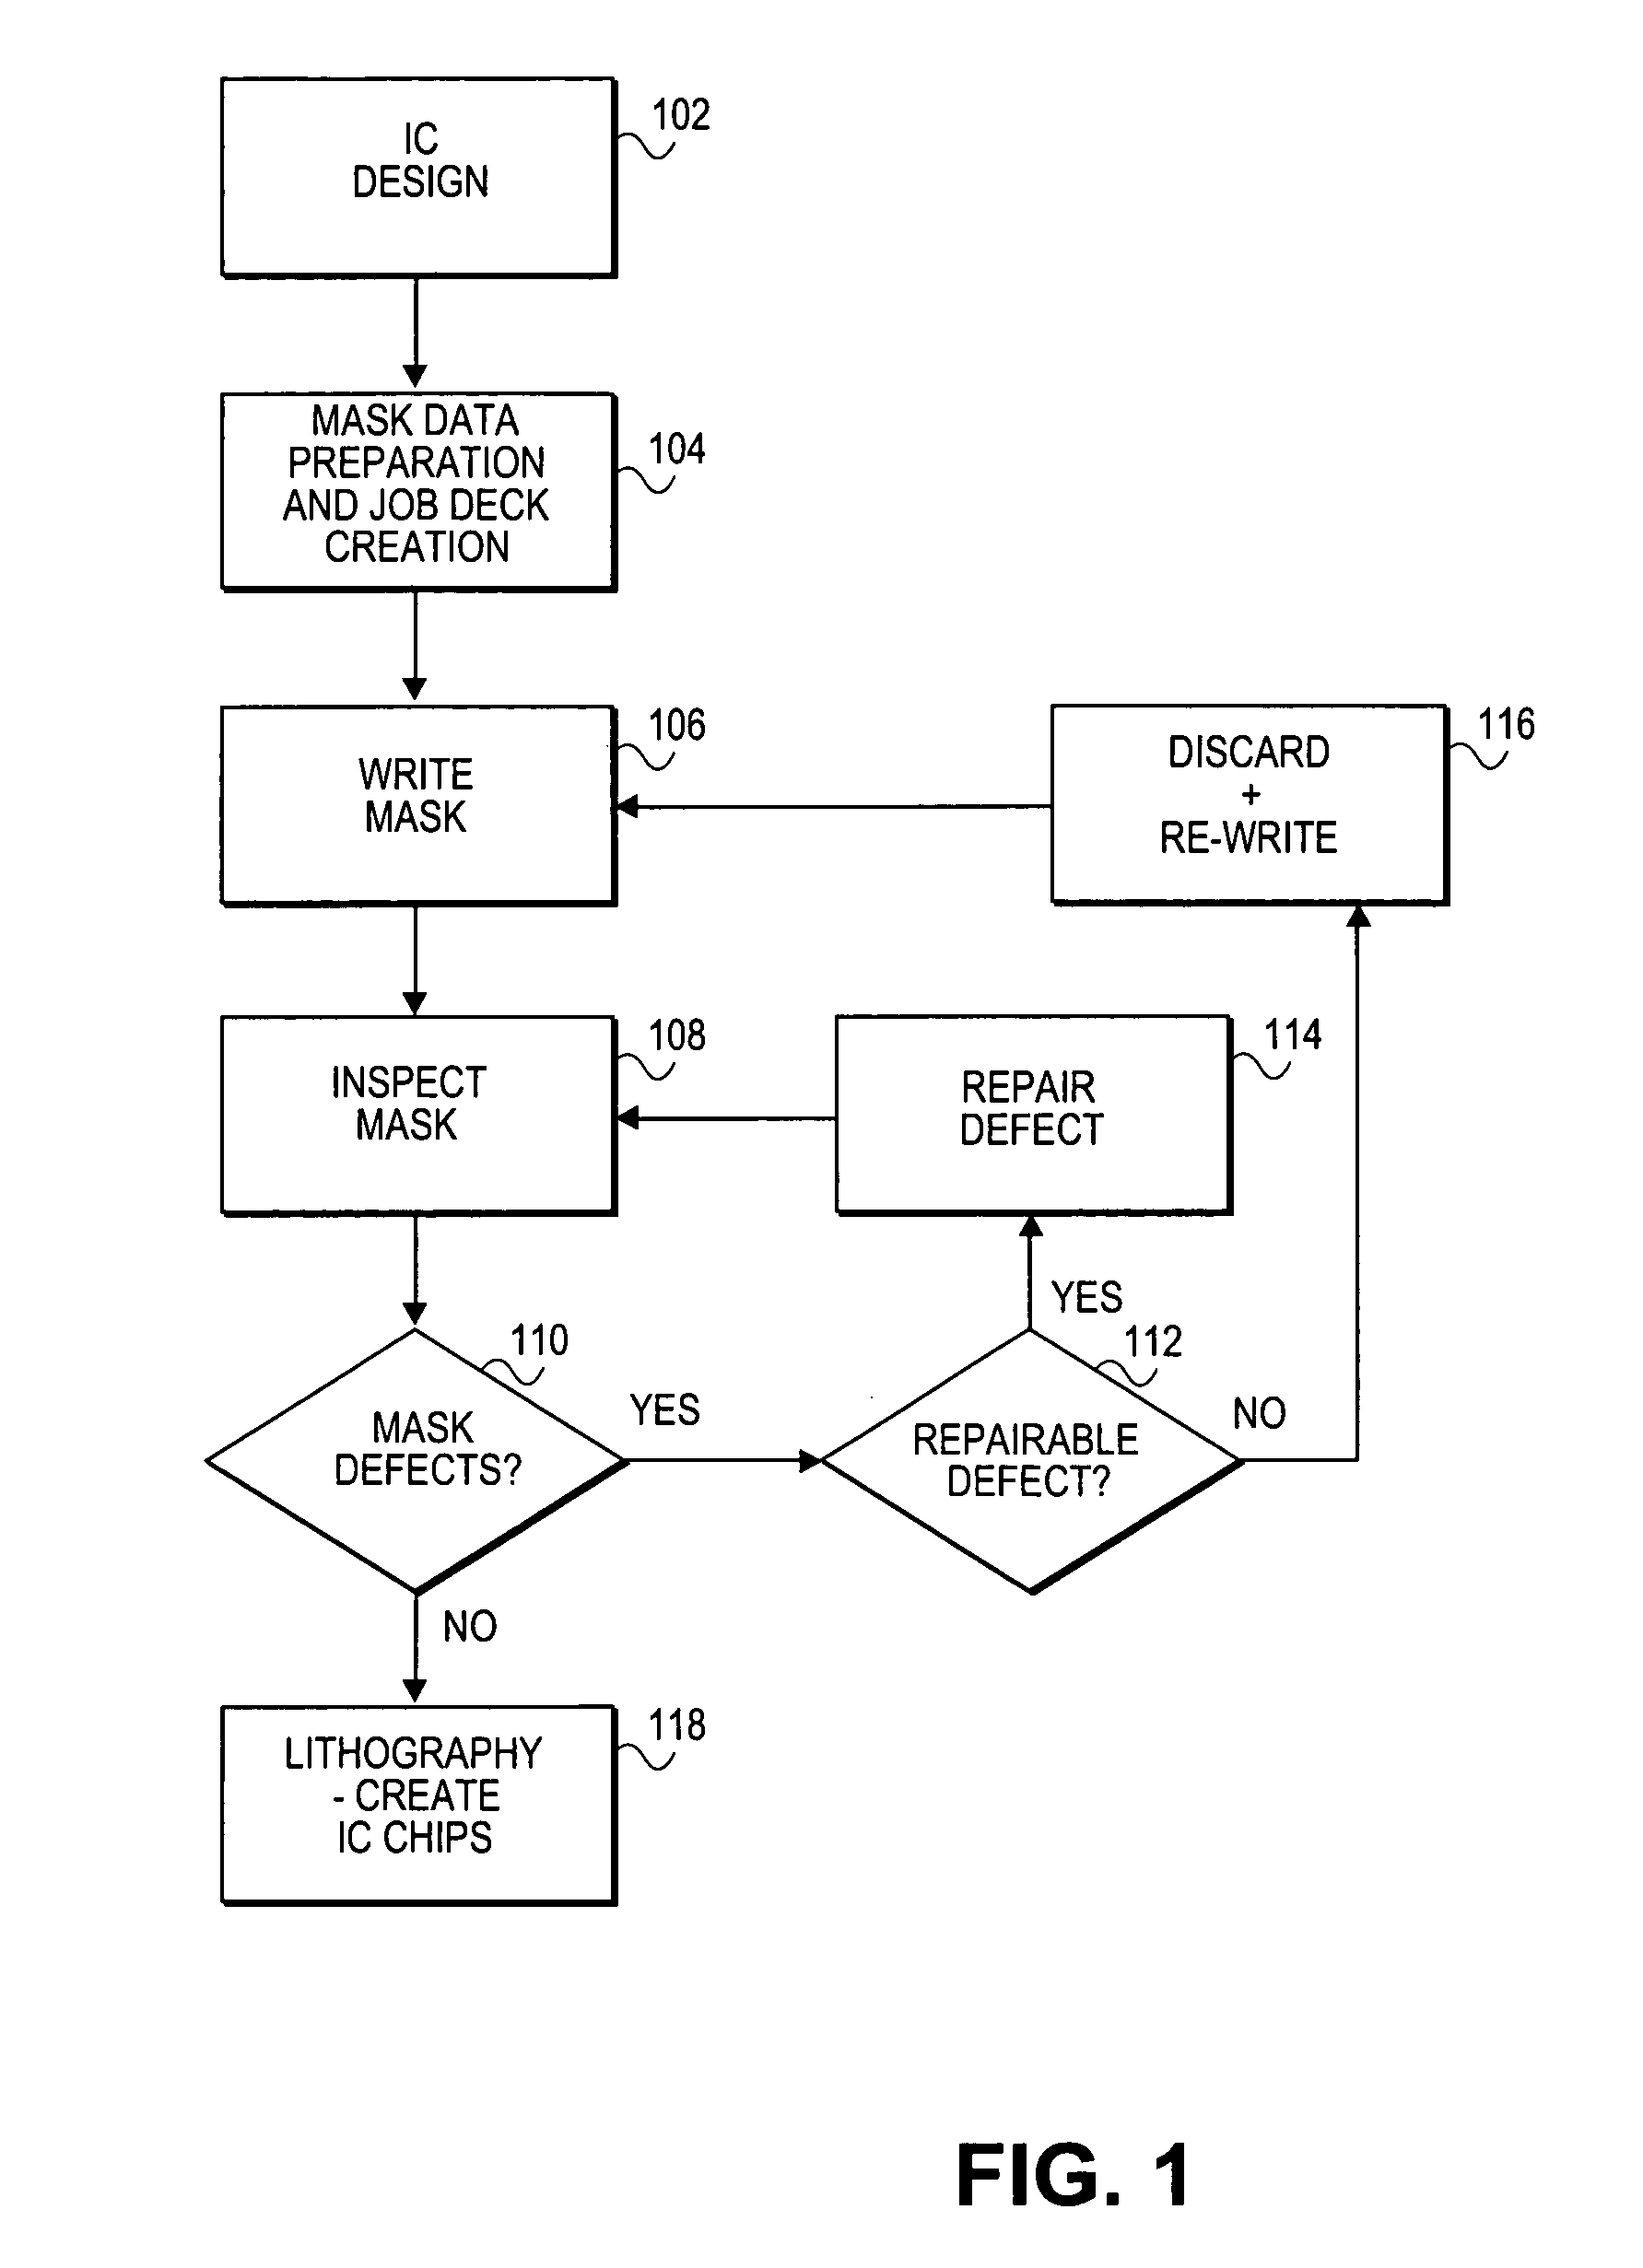 Method and system for context-specific mask inspection